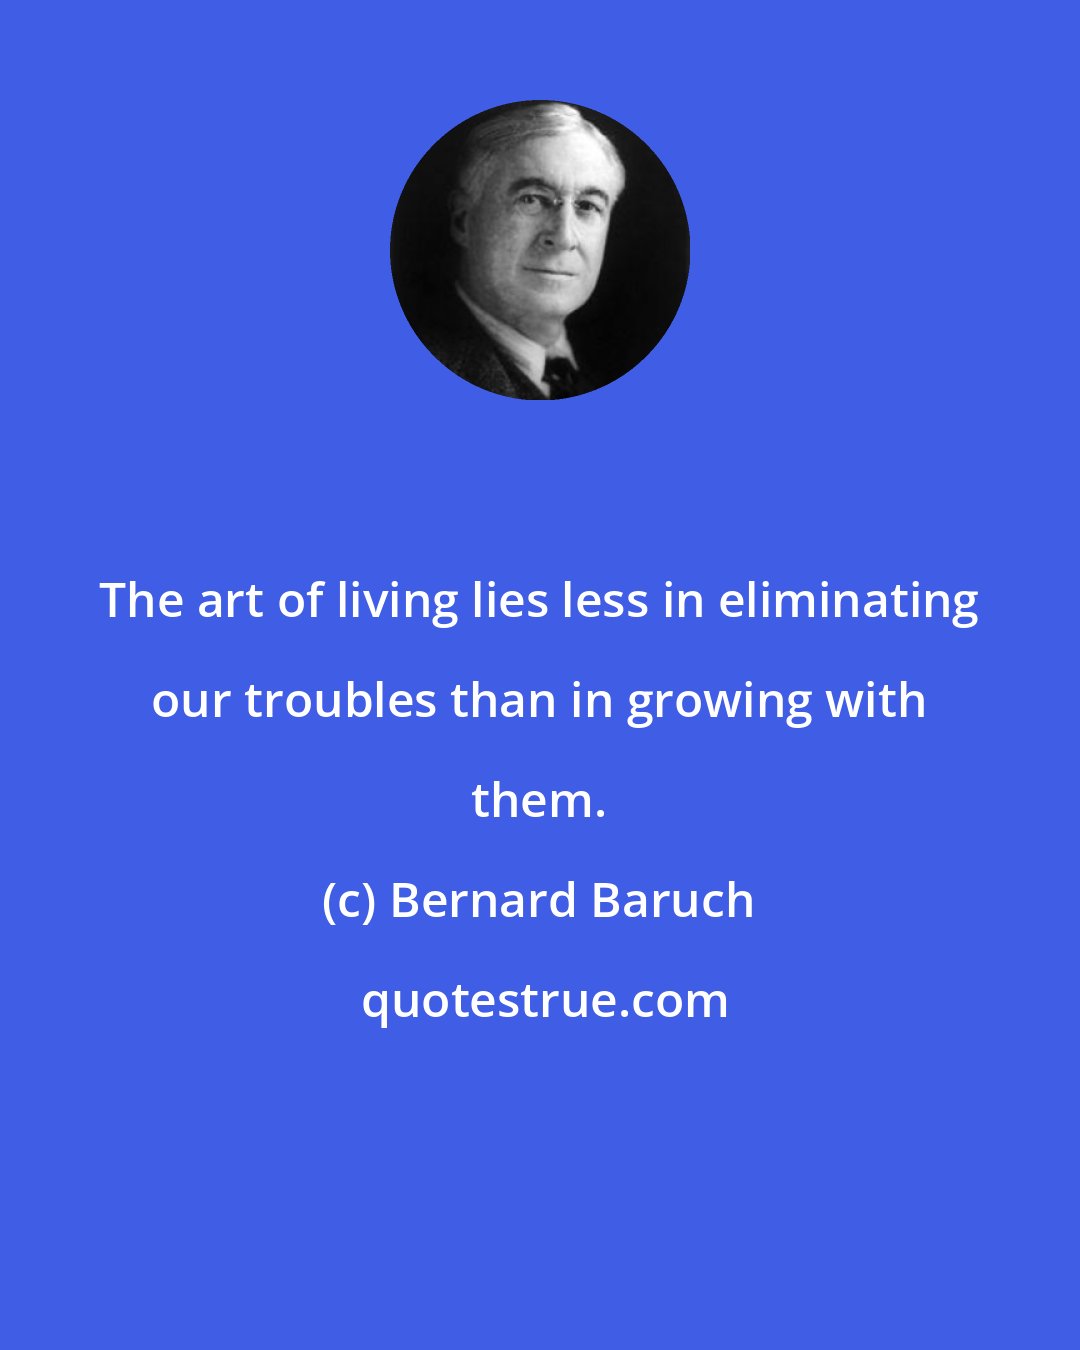 Bernard Baruch: The art of living lies less in eliminating our troubles than in growing with them.